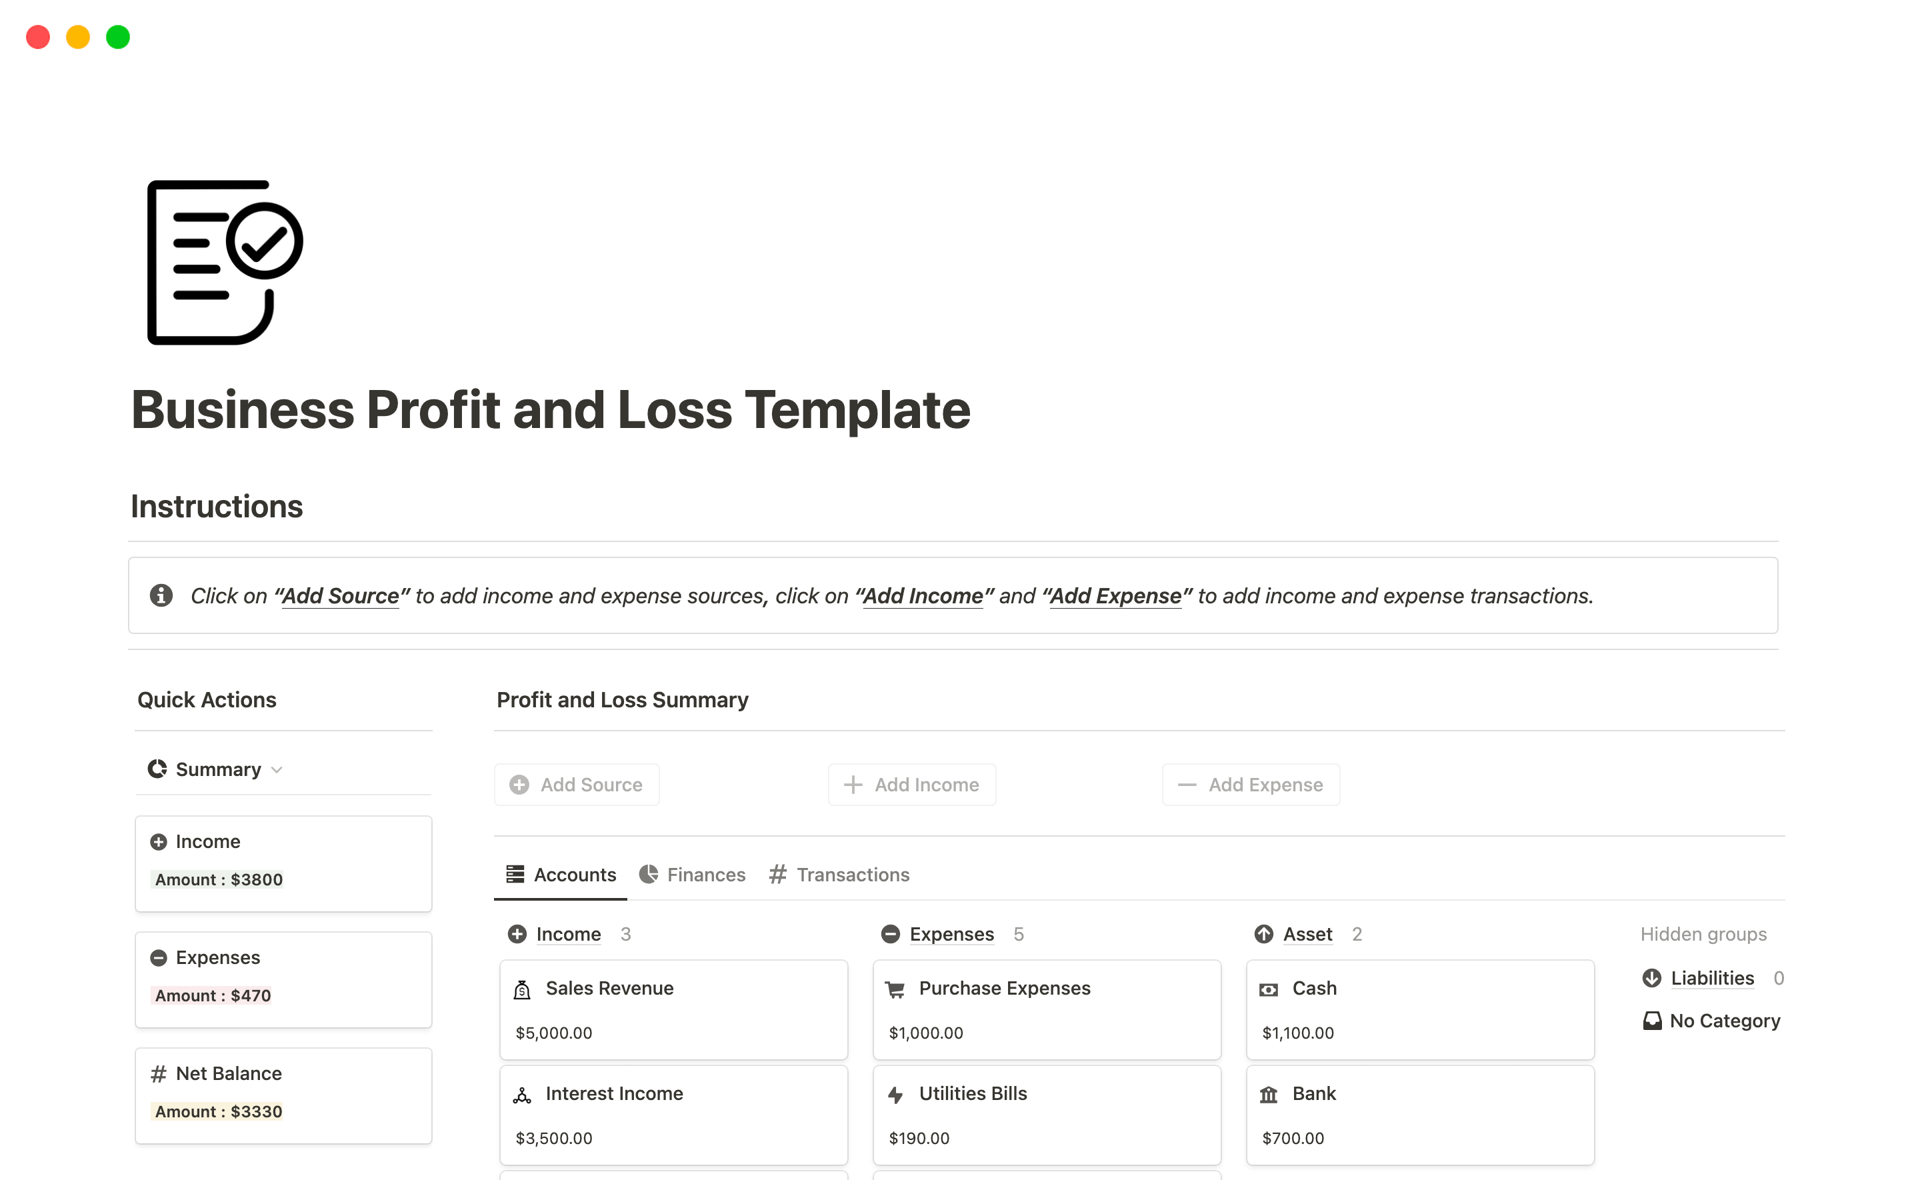 This is a user-friendly template that helps individuals or businesses track their income and expenses over a specific period to determine their profitability.